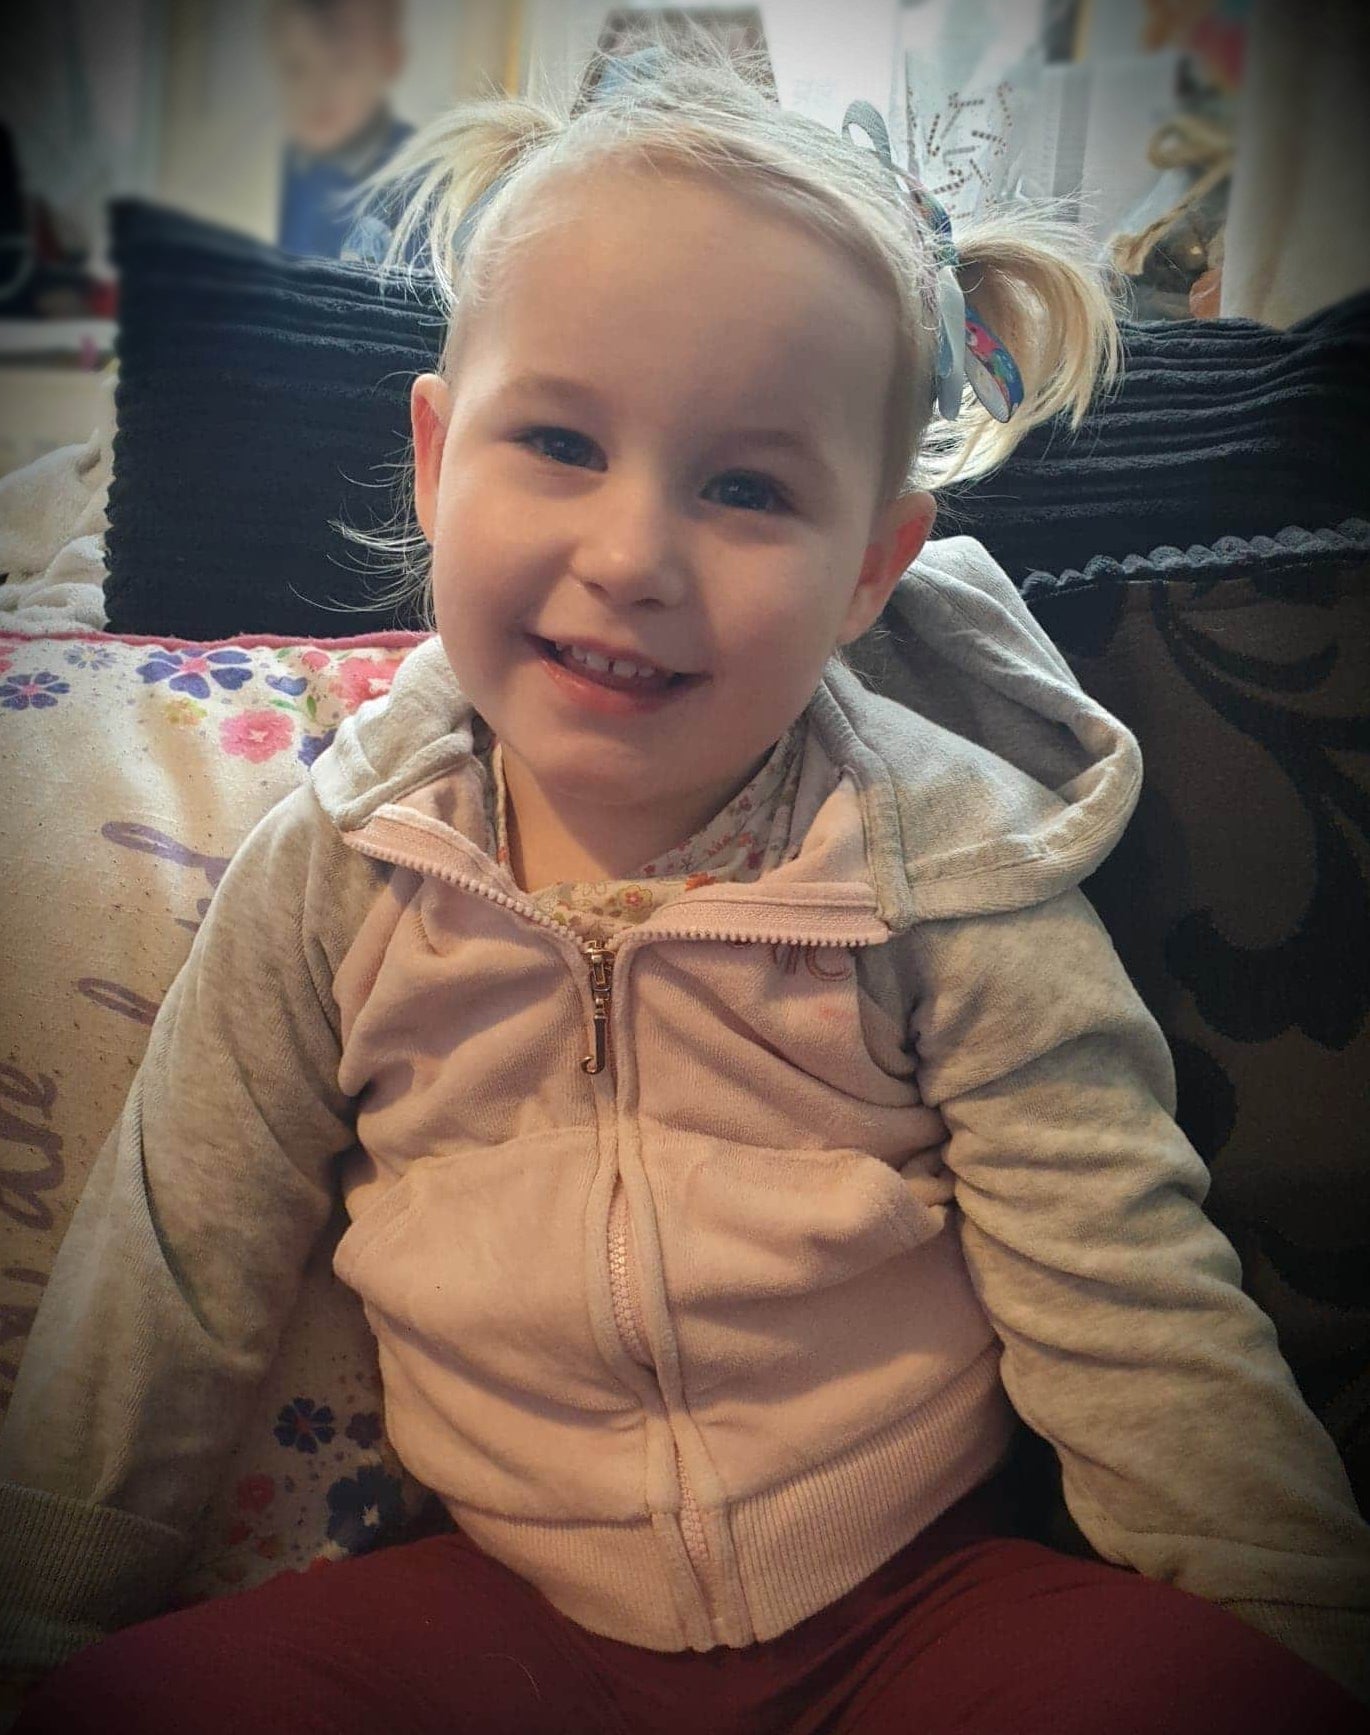 Two-year-old Lola James died after suffering a ‘catastrophic’ head injury at her home in Haverfordwest in July 2020 (Dyfed-Powys Police/PA)